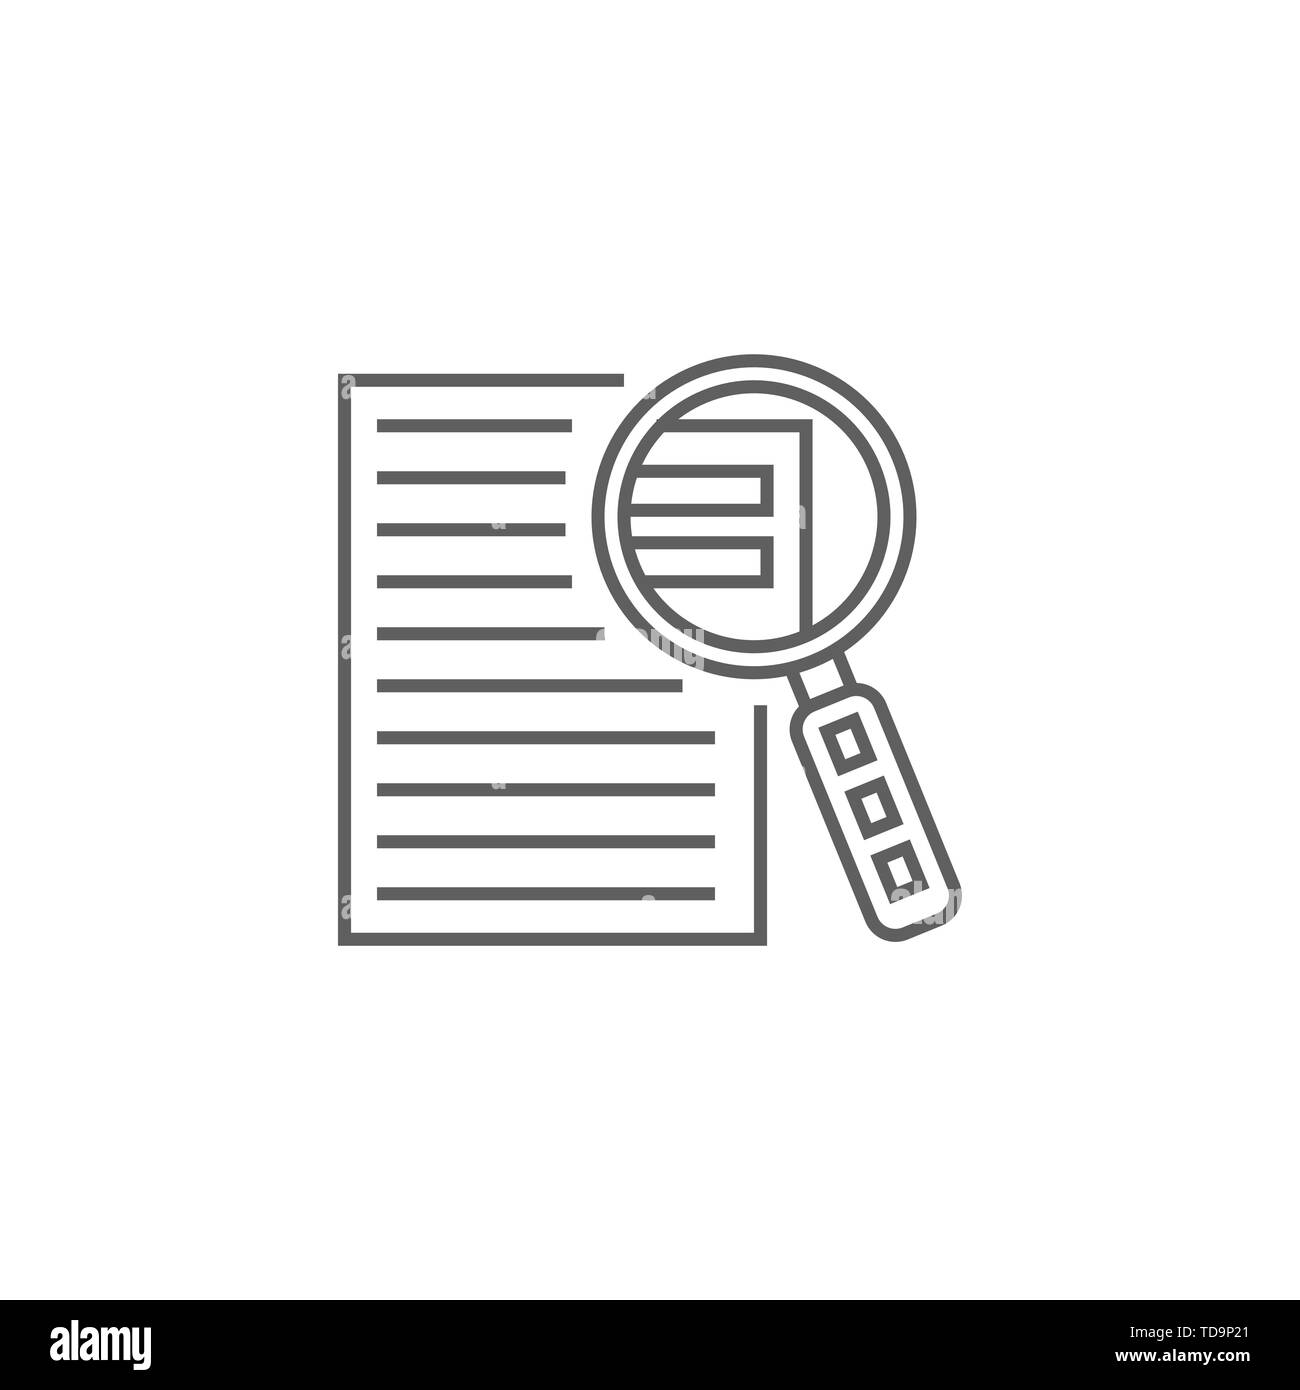 Case Study Services Related Vector Thin Line Icon. Isolated on White Background. Editable Stroke. Vector Illustration. Stock Vector